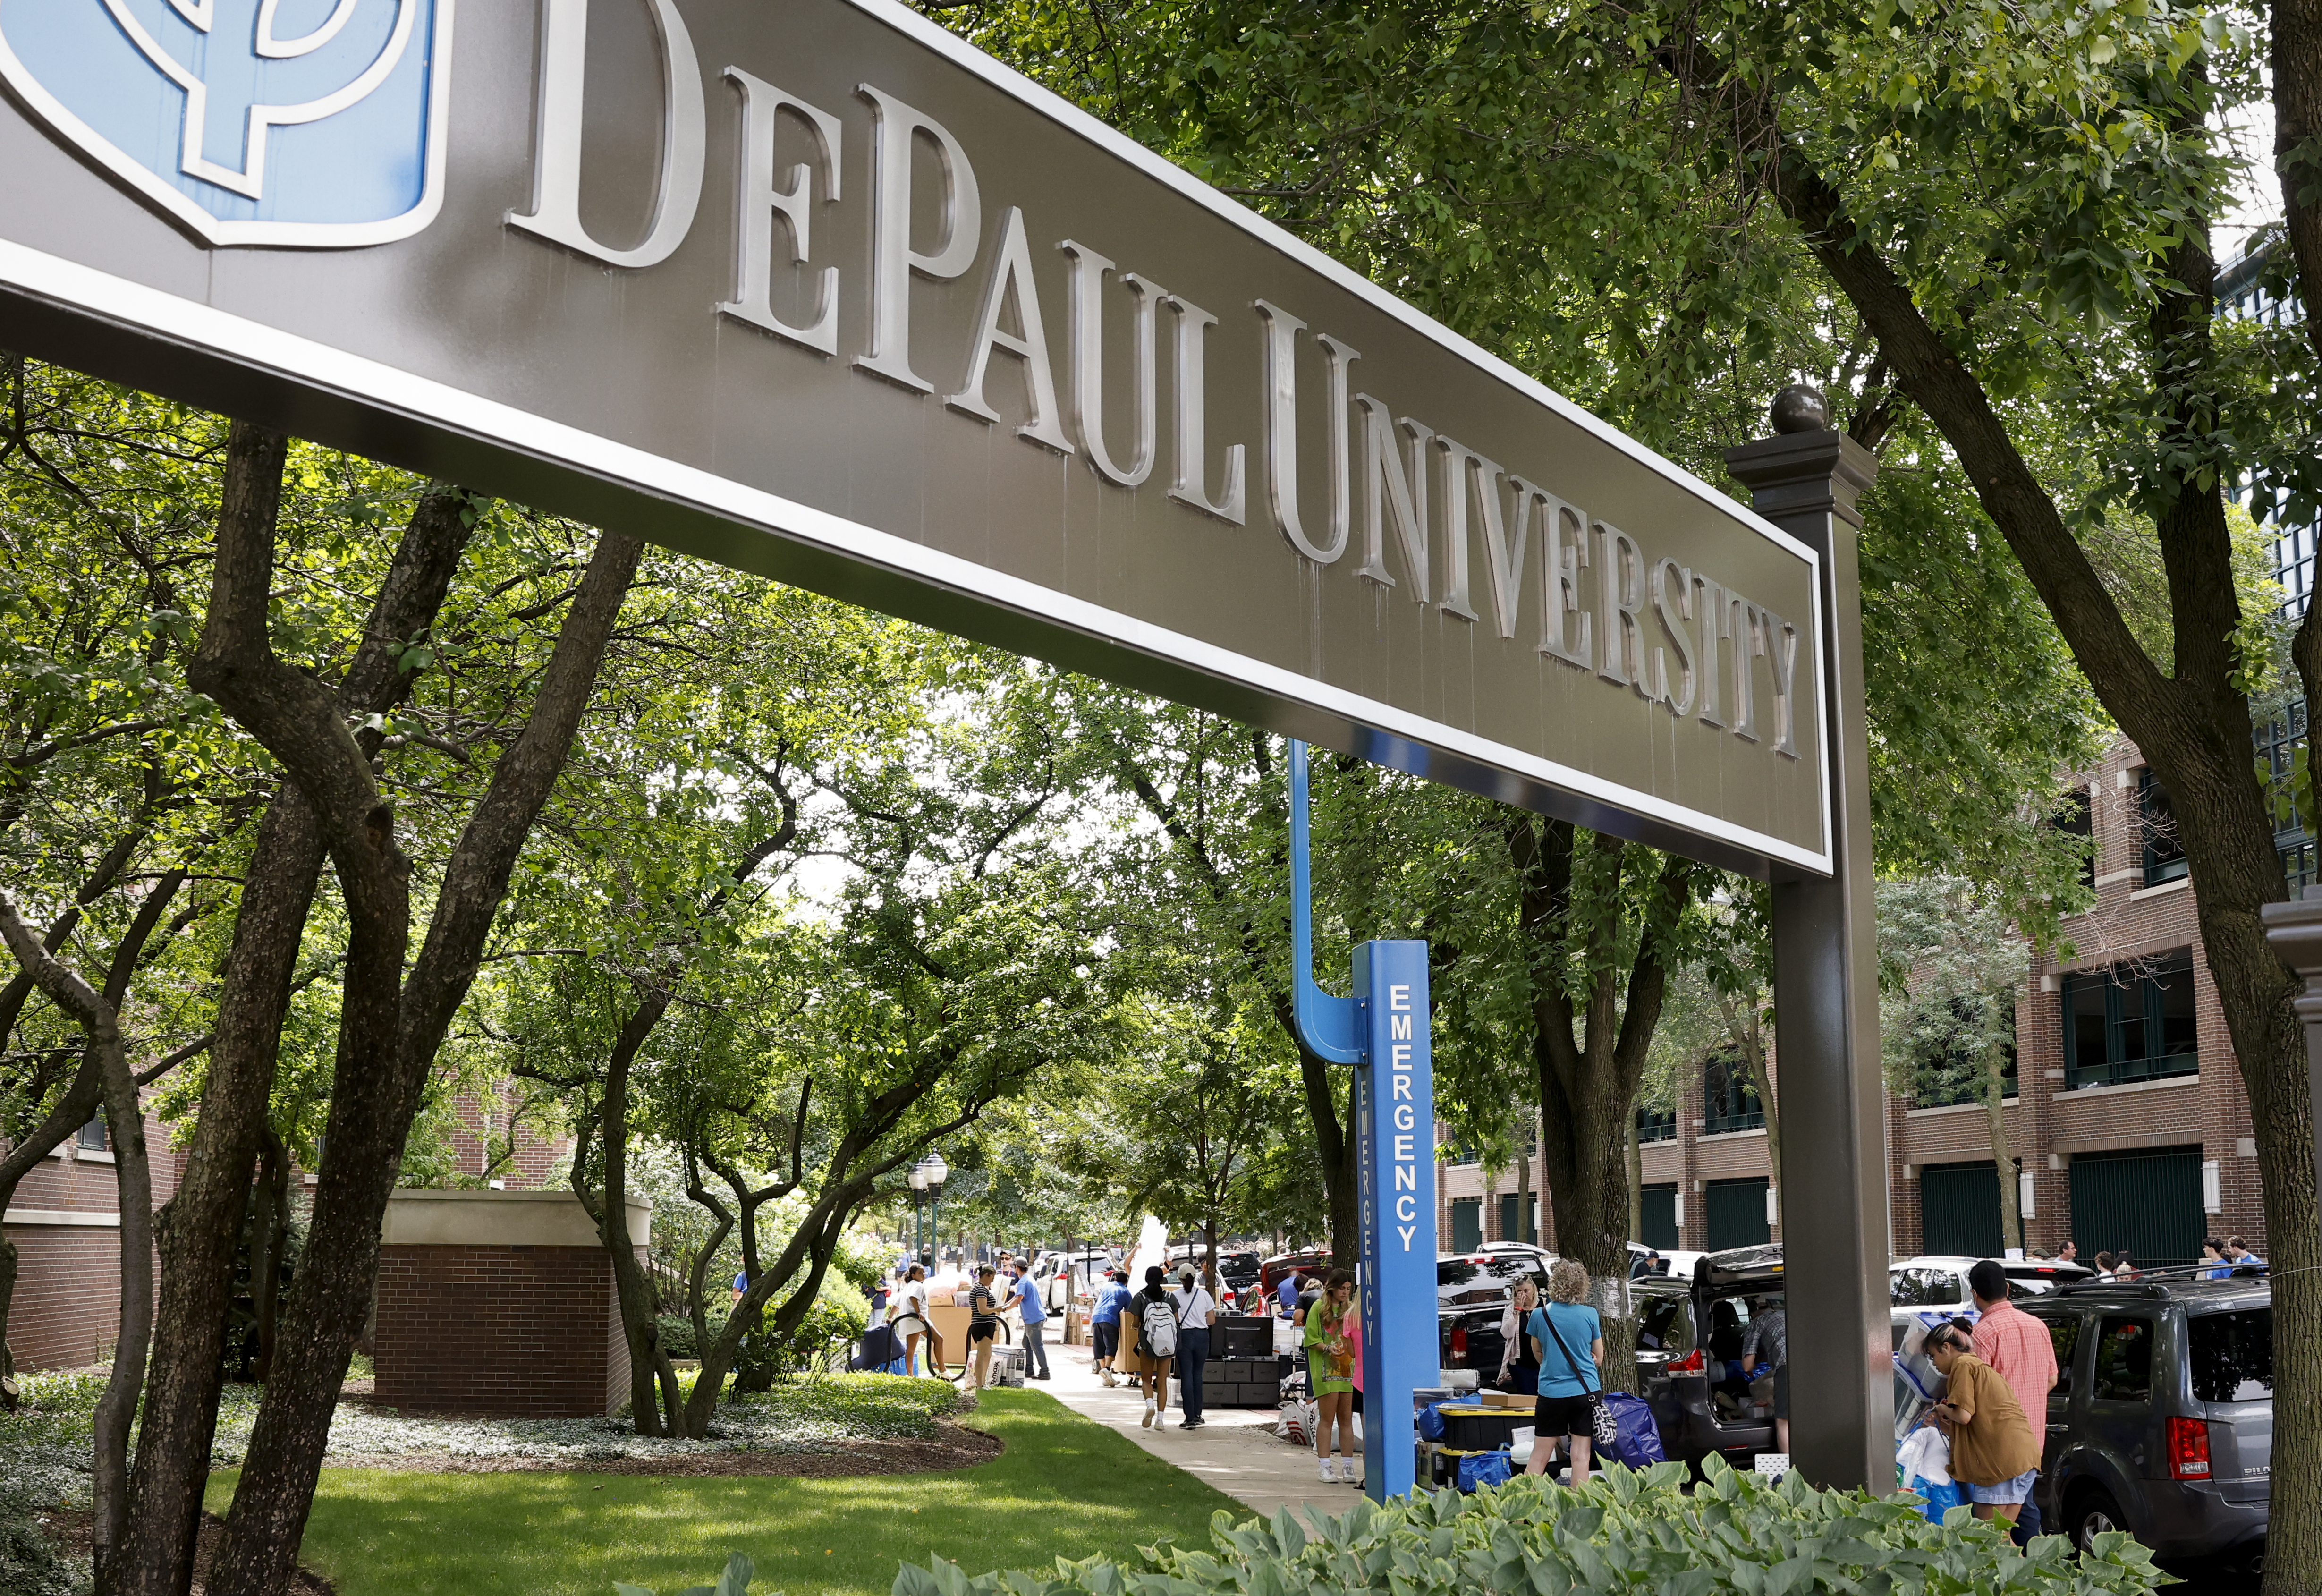 DePaul welcomes home students on Move-in Weekend